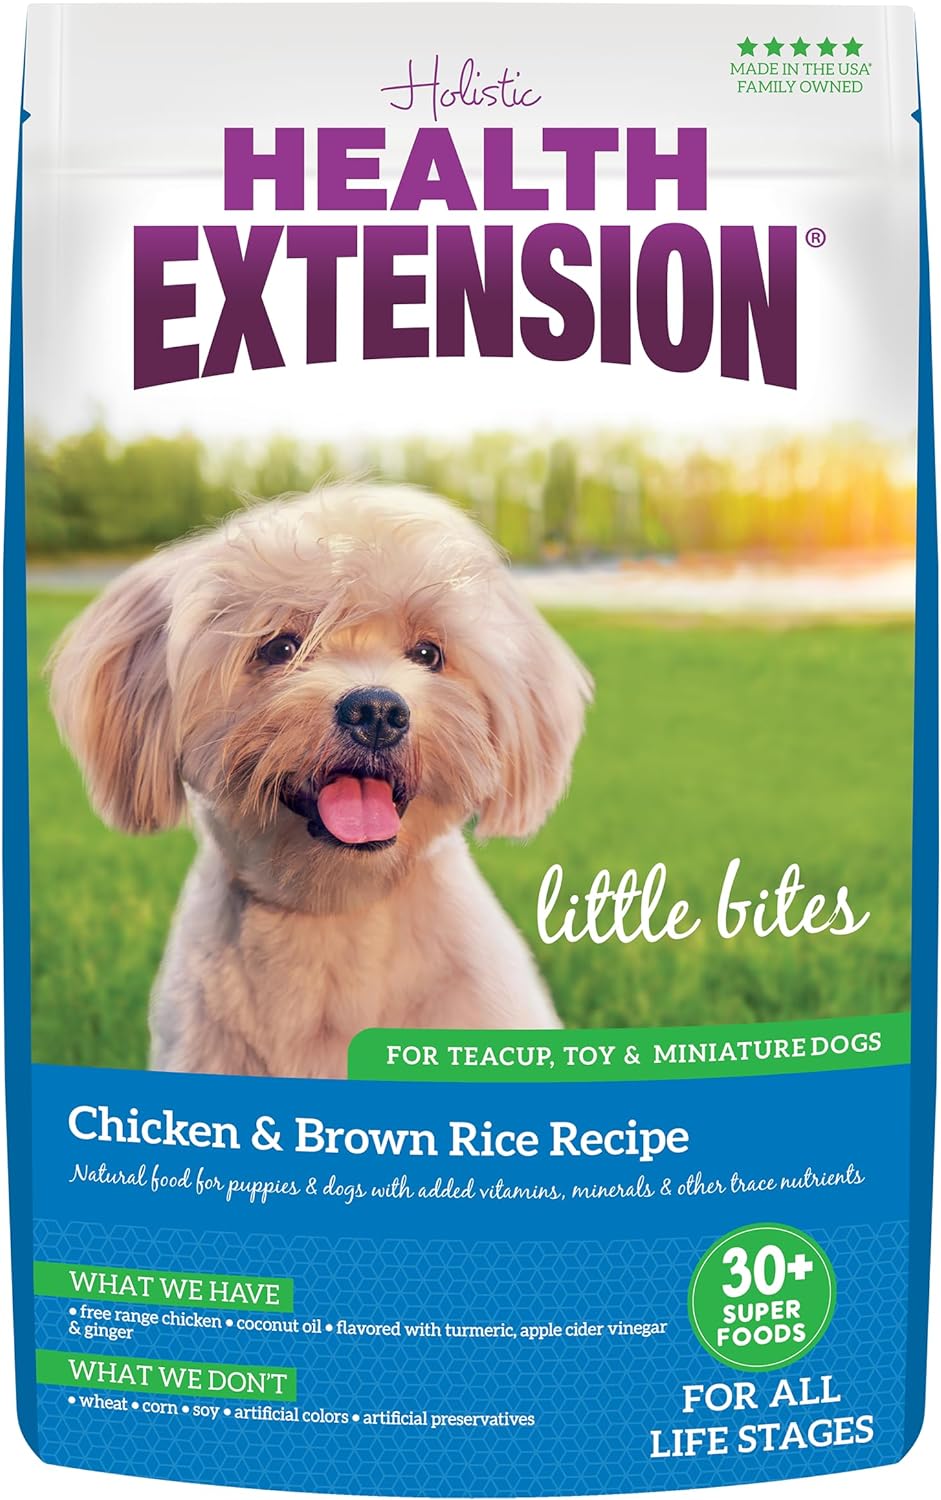 Health Extension Little Bites Dry Dog Food, Natural Food with Added Vitamins & Minerals, Suitable for Teacup, Toy & Small Dogs, Chicken & Brown Rice Recipe (18 Pound / 8.1 Kg)